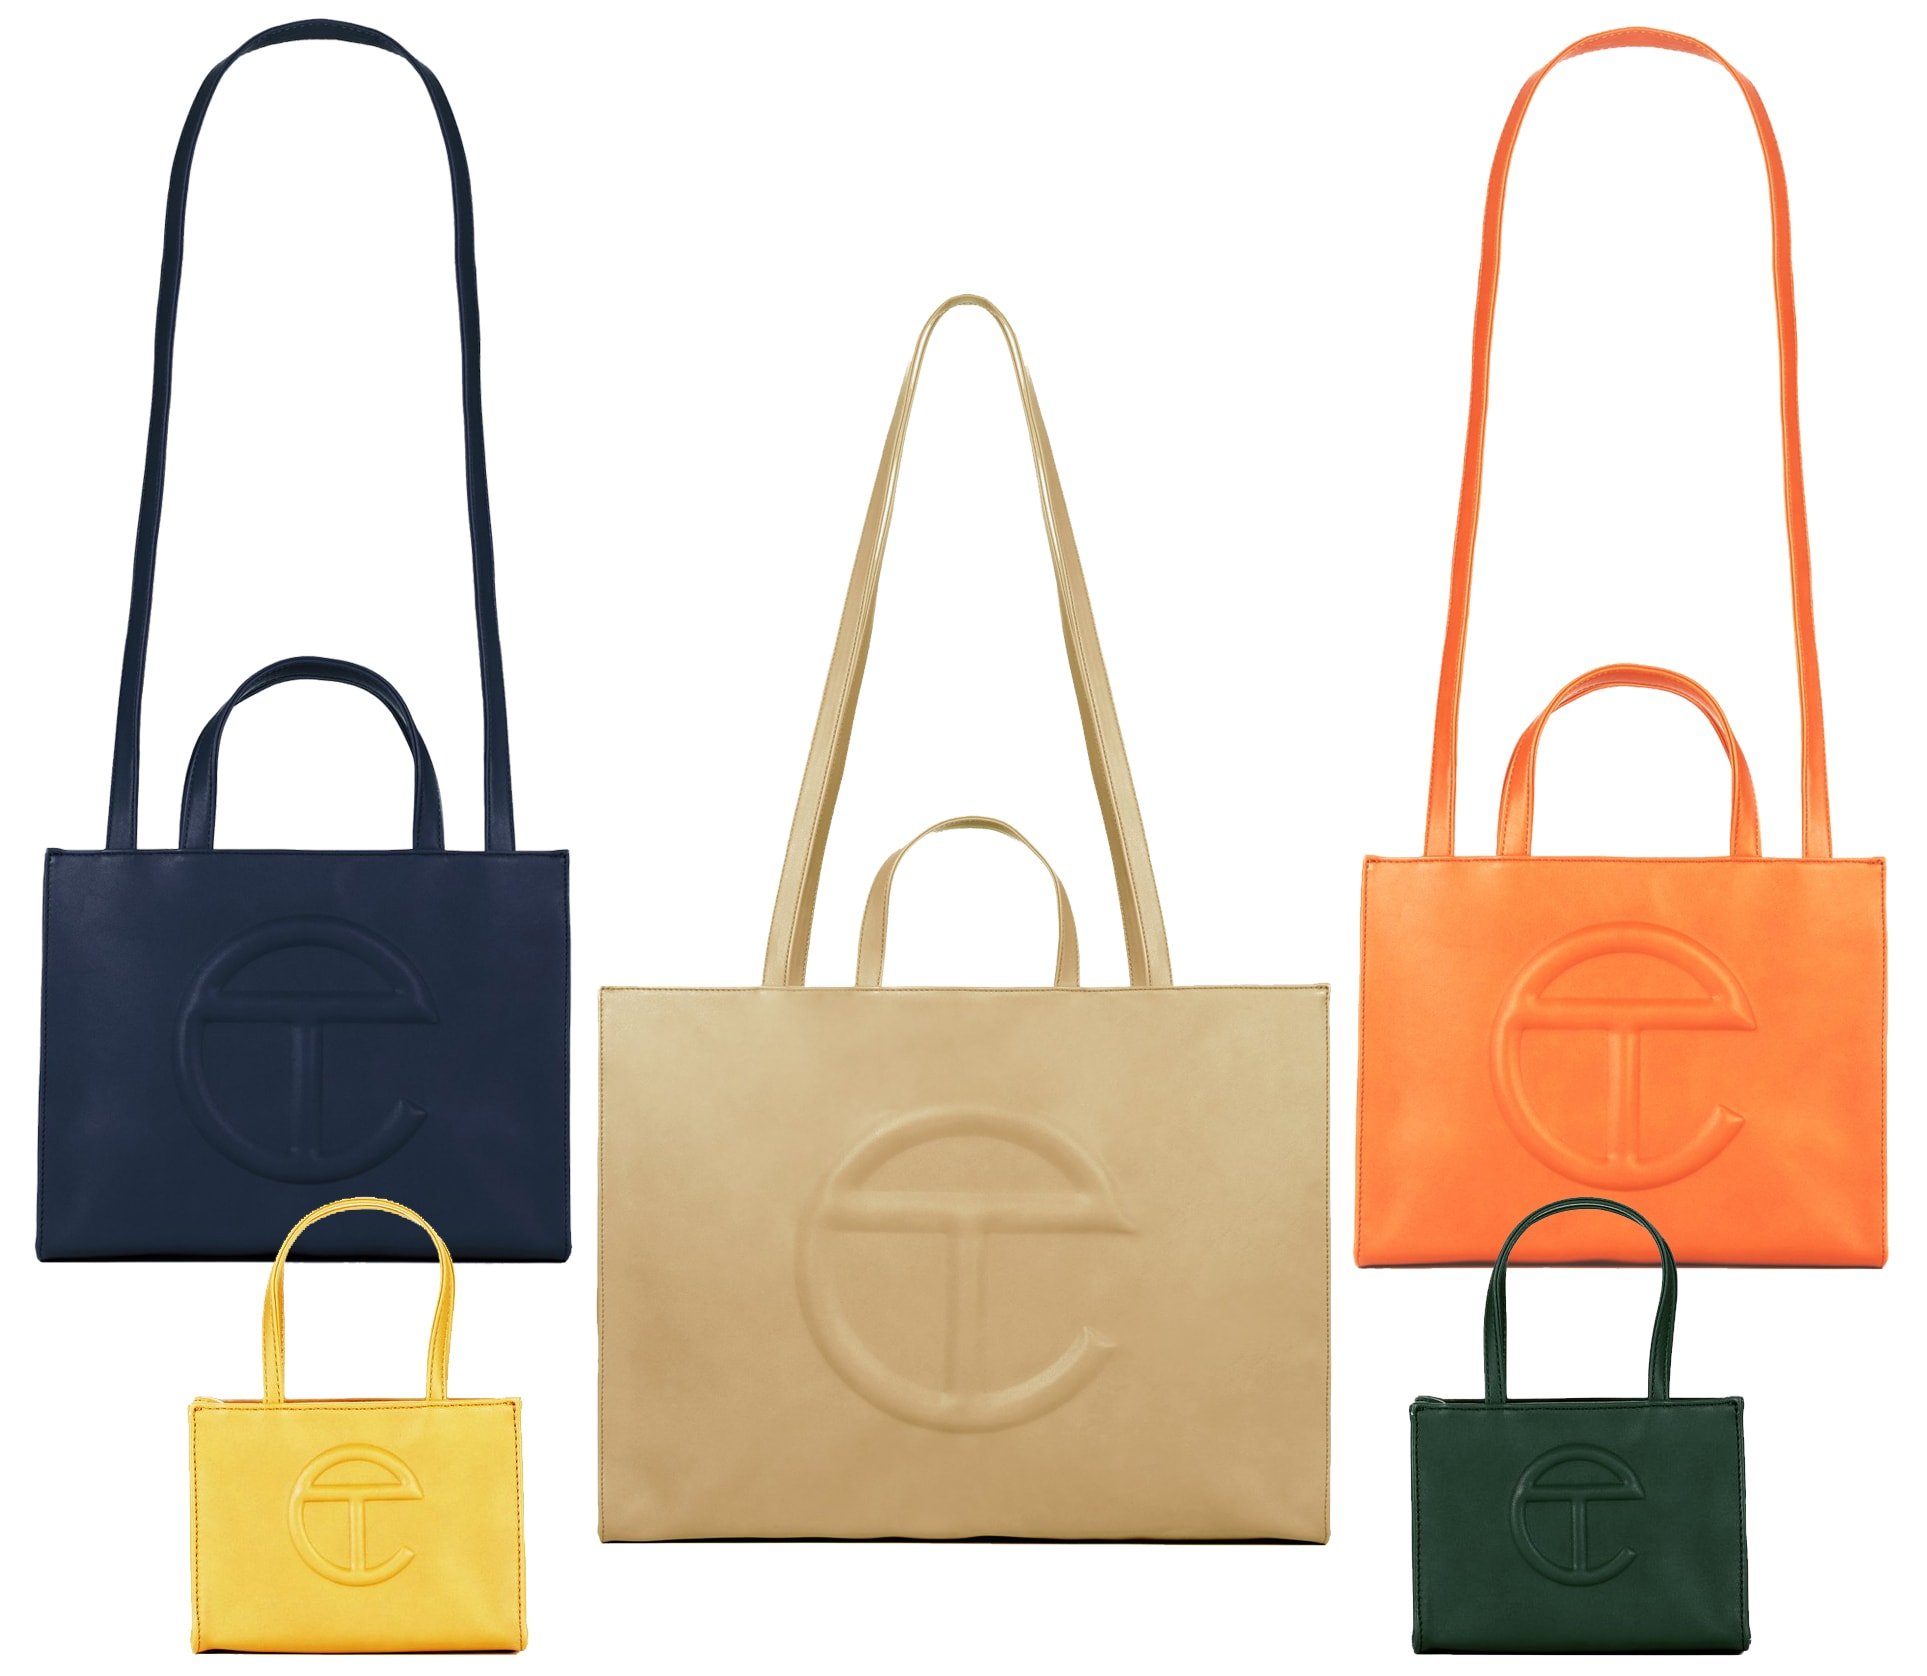 The Telfar Shopping Bag was considered the "it" bag of 2020, and it remains to be one of the hottest bags